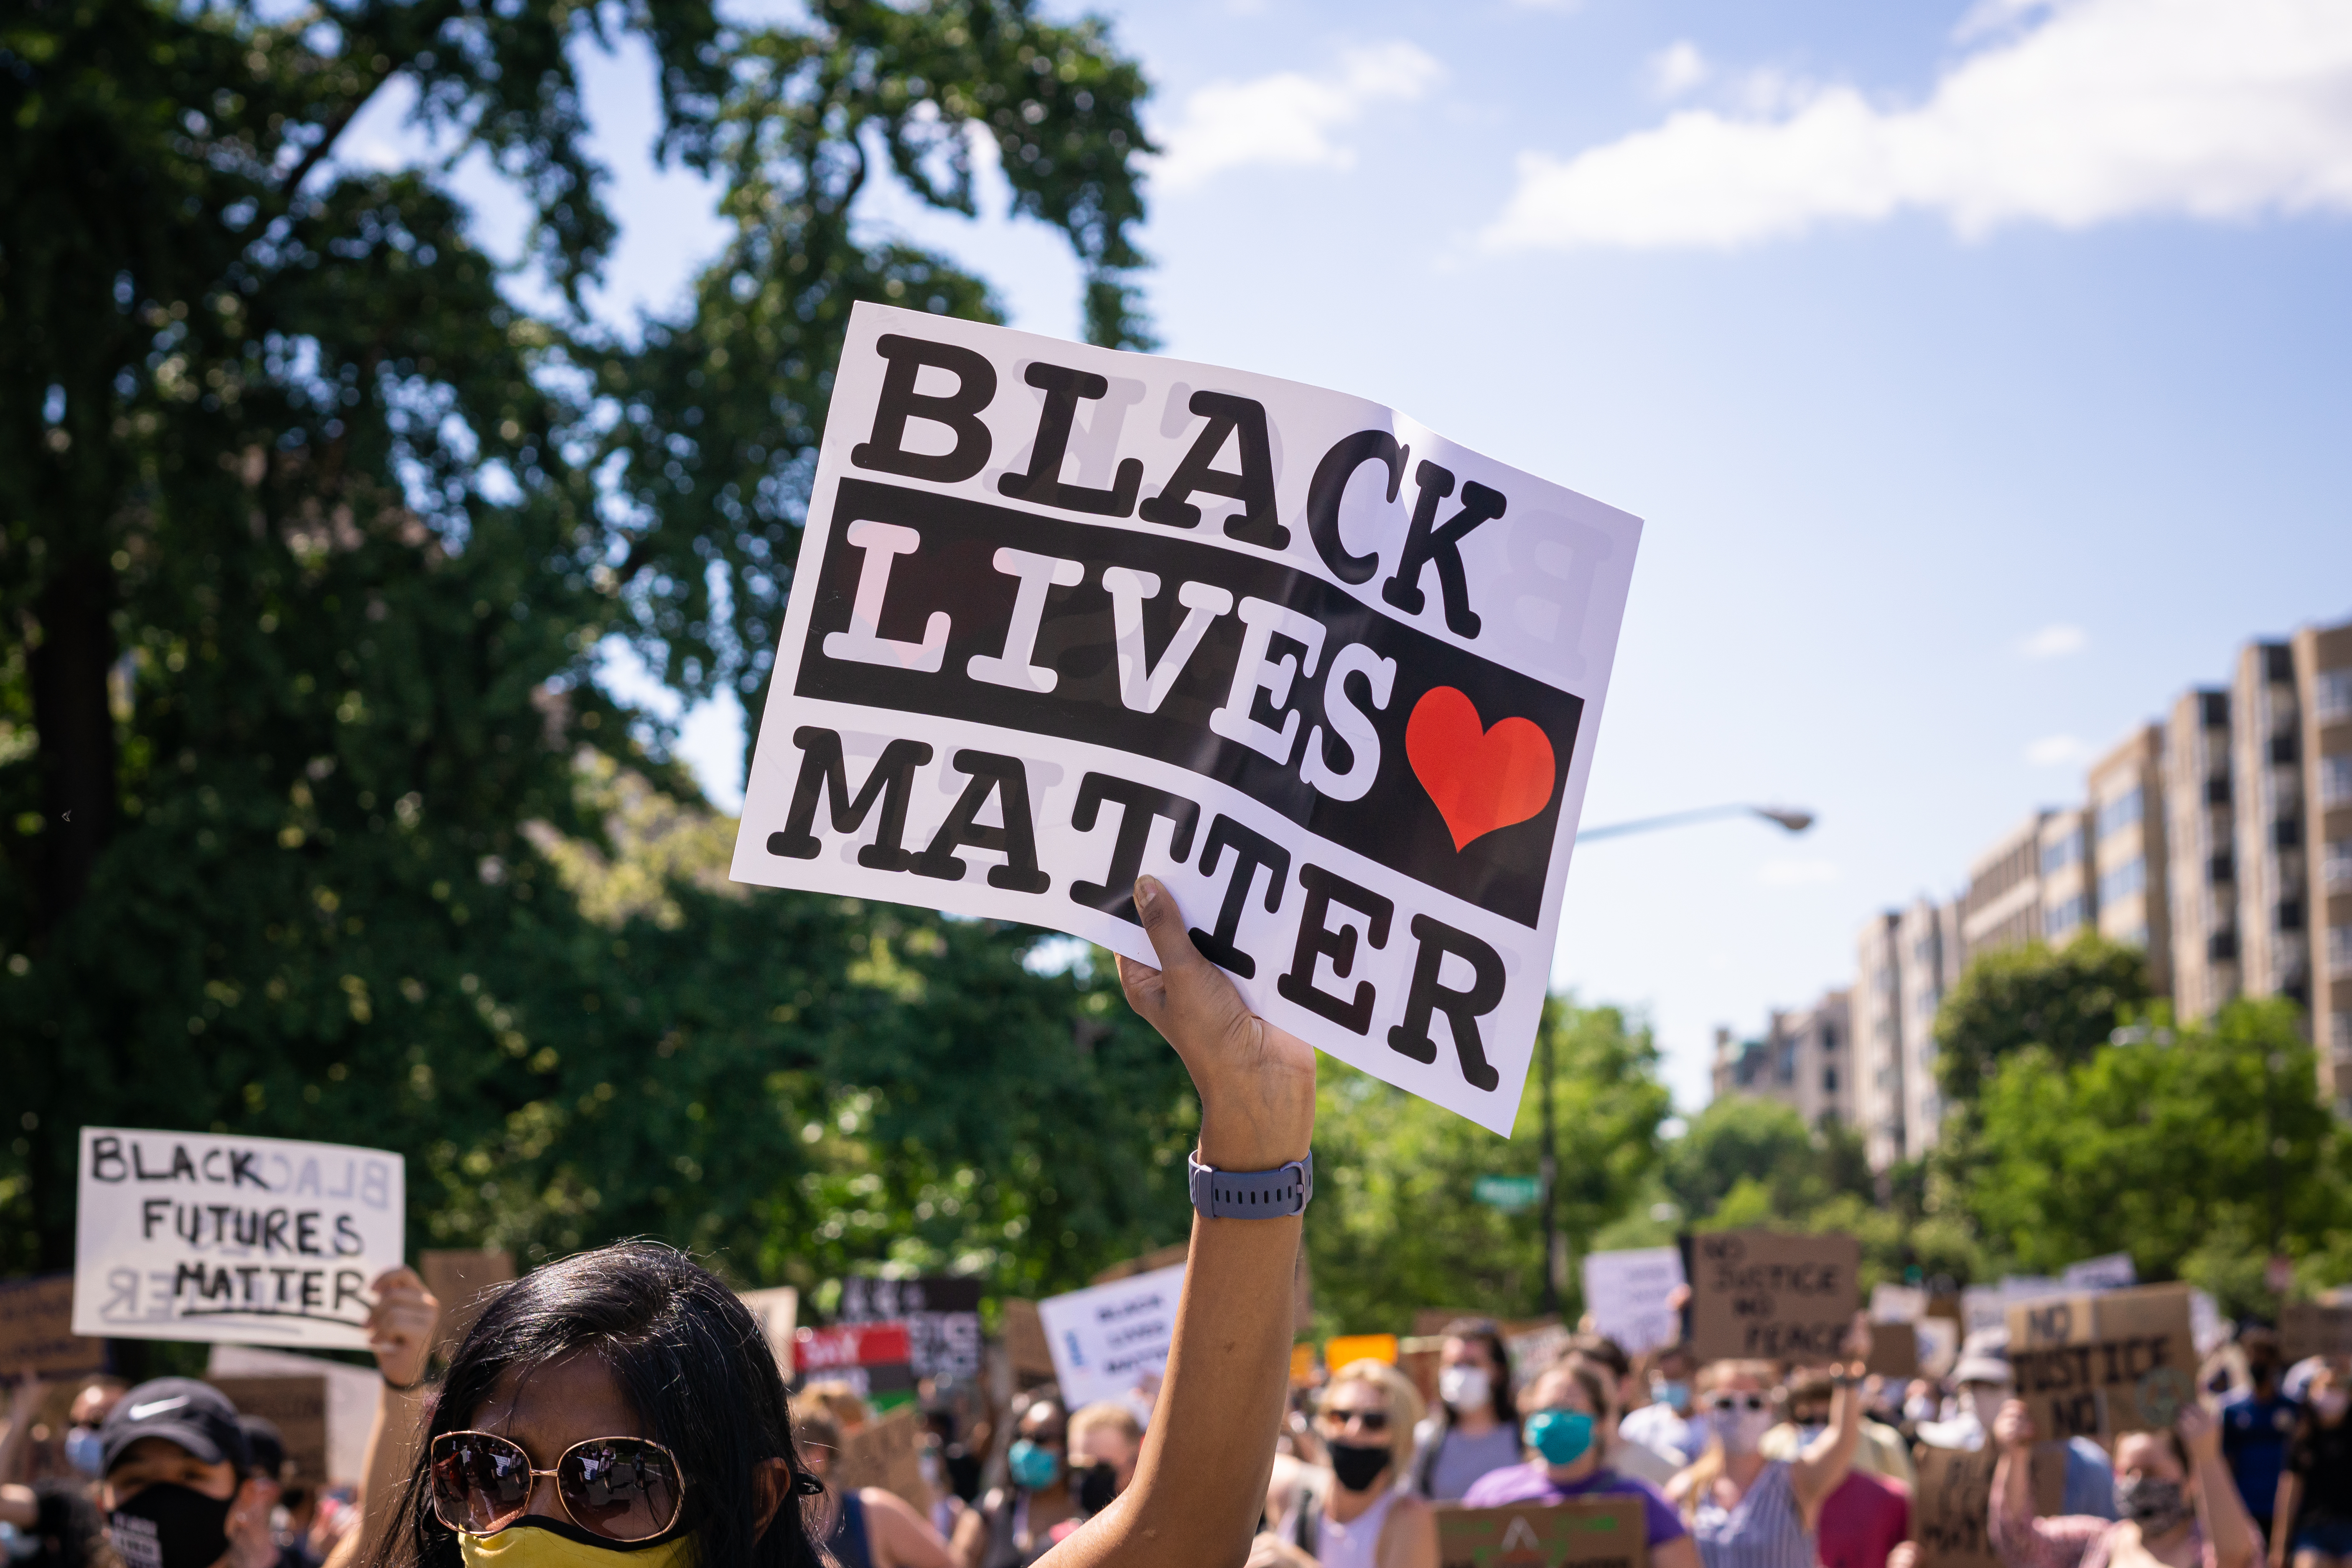 One Year Later: Corporate Action, Popular Opinion, and the Fight for Racial Justice